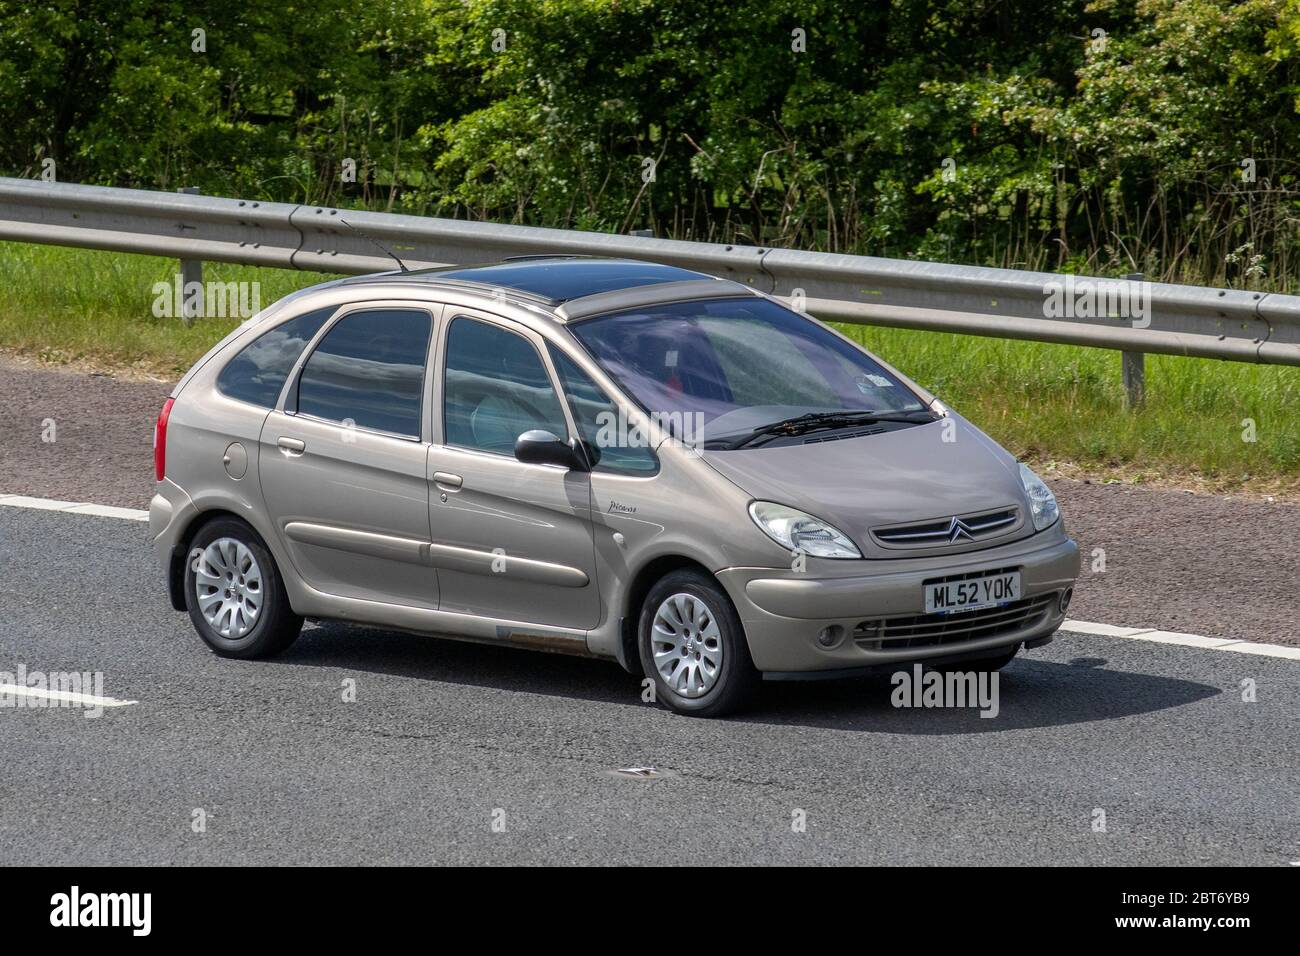 2002 beige Citroën Xsara Picasso Exclusive; Vehicular traffic moving vehicles, cars driving vehicle on UK roads, motors, motoring on the M61 motorway highway Stock Photo